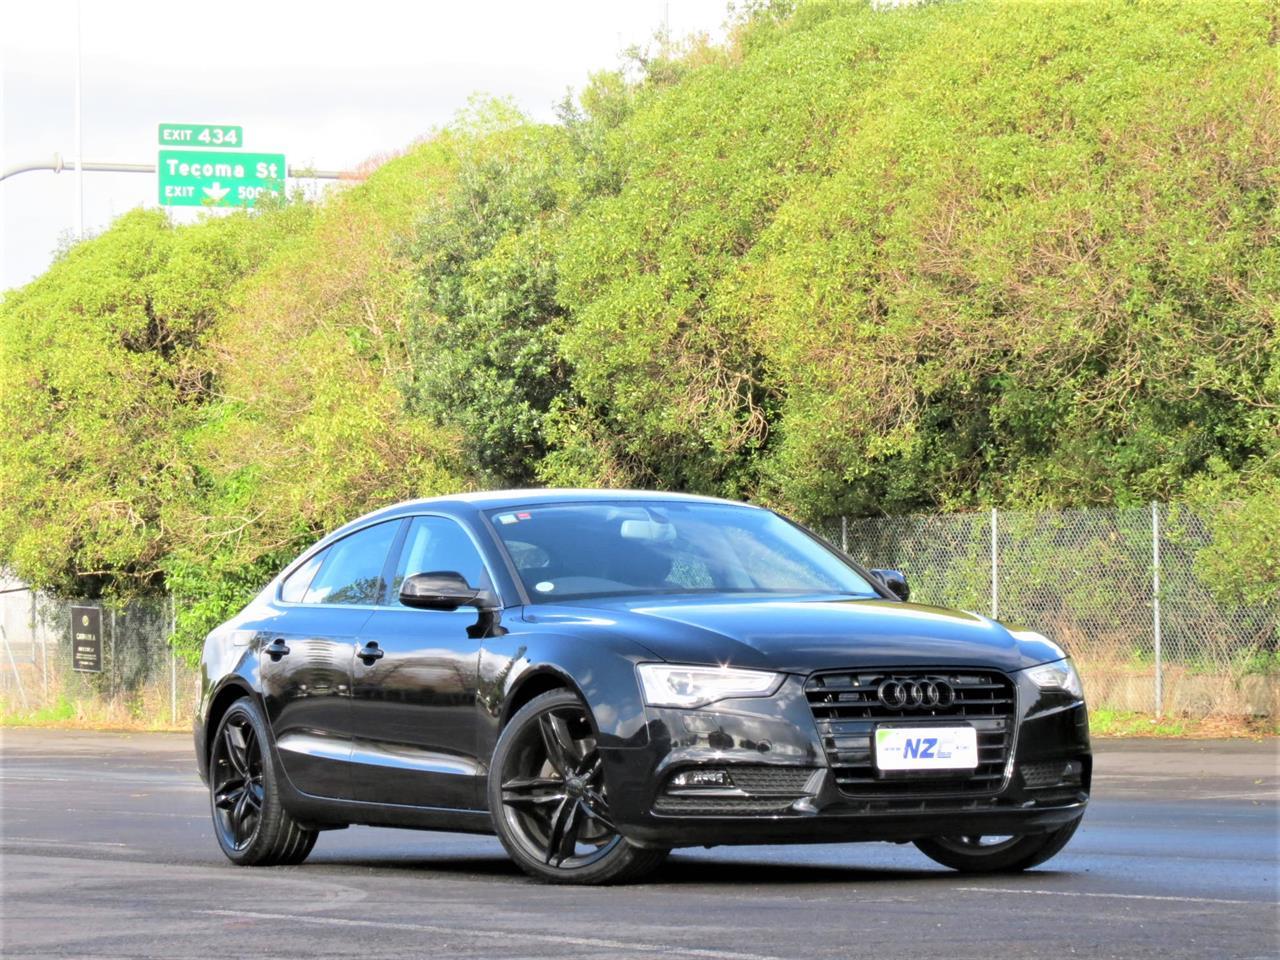 2014 Audi A5 TURBO + LEATHER + ONLY 64 KM'S